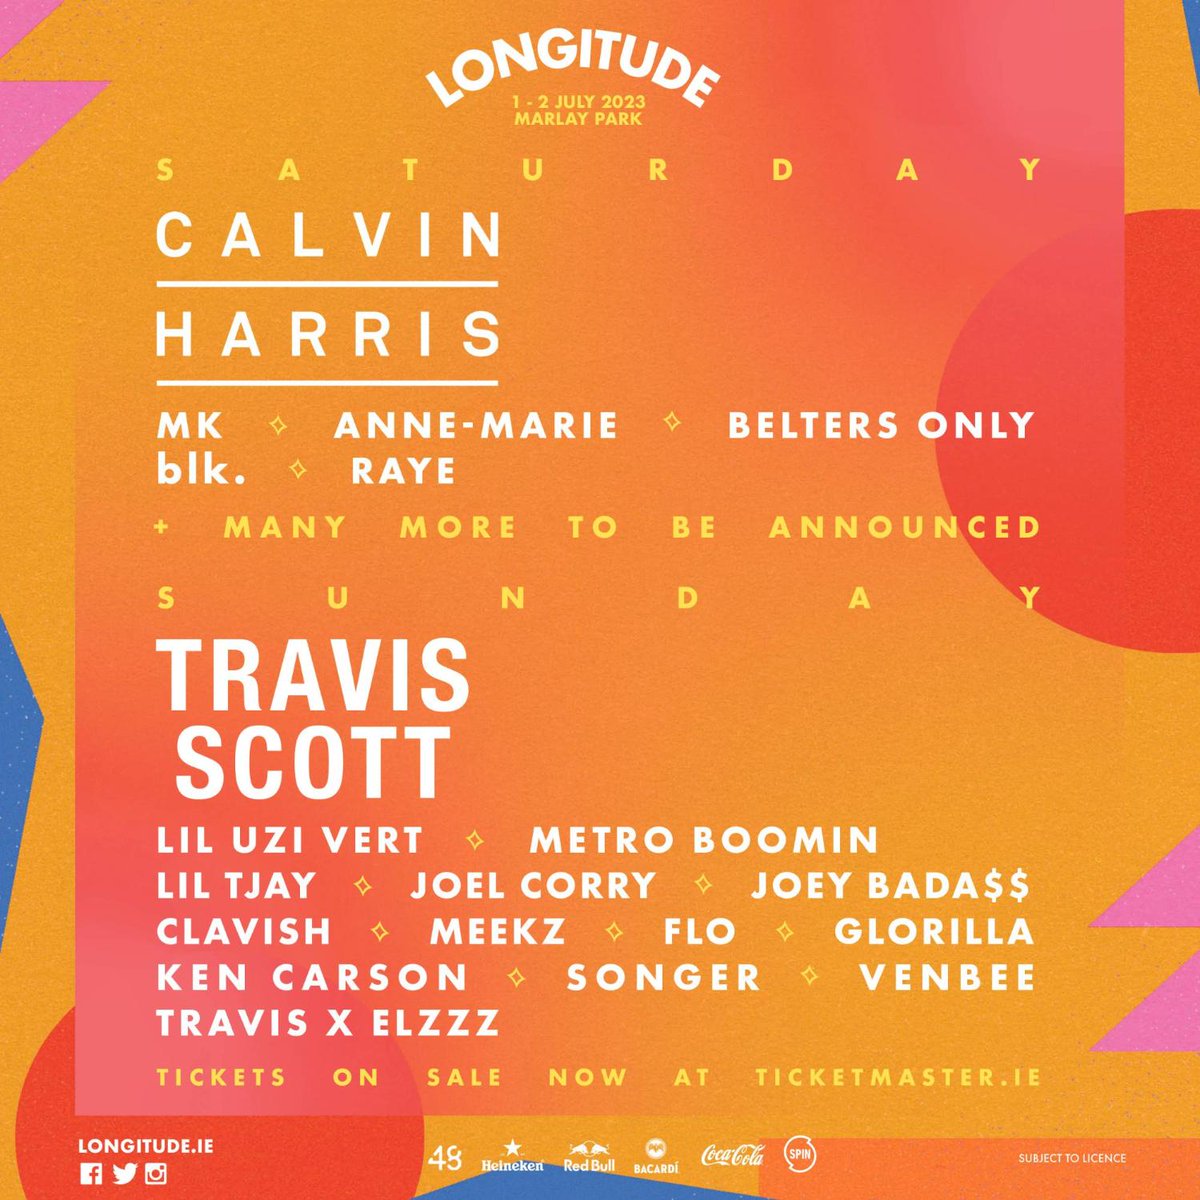 🚨 #Longitude 2023 Lineup Update🚨 🎡Saturday Headliners: Clavin Harris, MK, Anne-Marie and Belters Only 🎡Sunday Headliners: Travis Scott, Joel Corry, Lil Uzi Vert, plus many more! Keep SPIN loud and make sure you're following us for your chance to win tickets!🙌